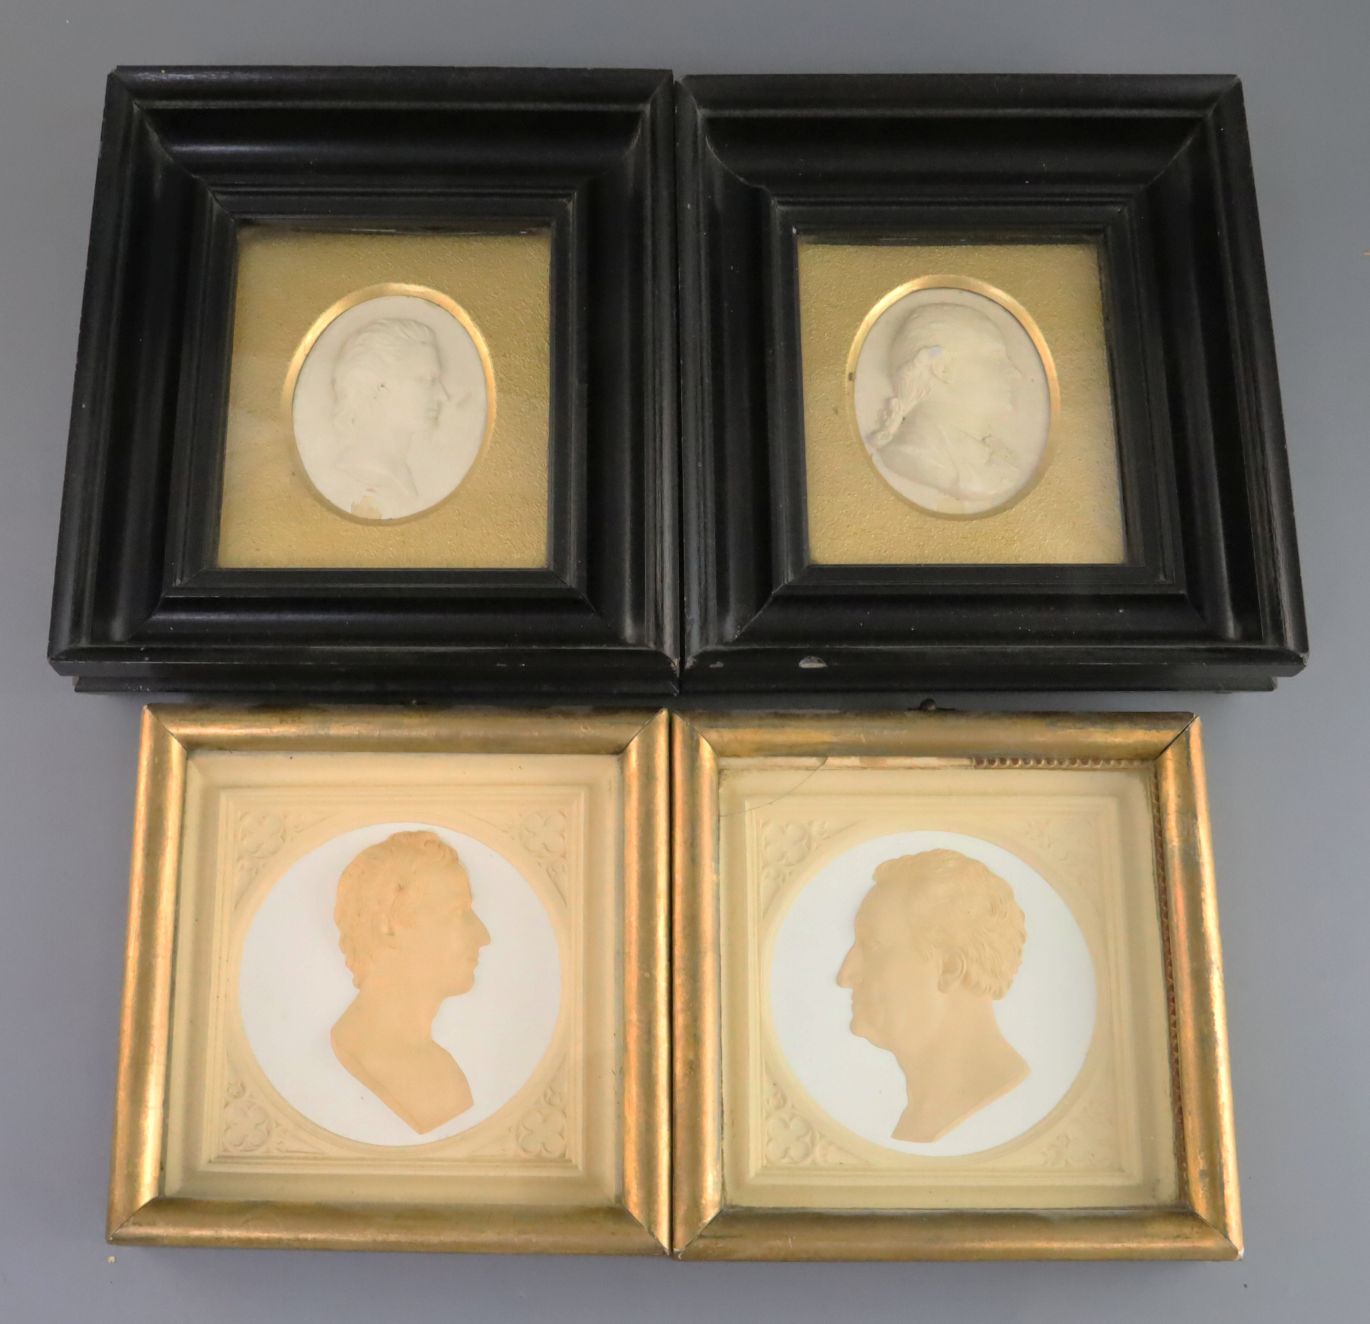 A pair of early Victorian plaster relief portrait plaques of Keates and Morot, retailed by